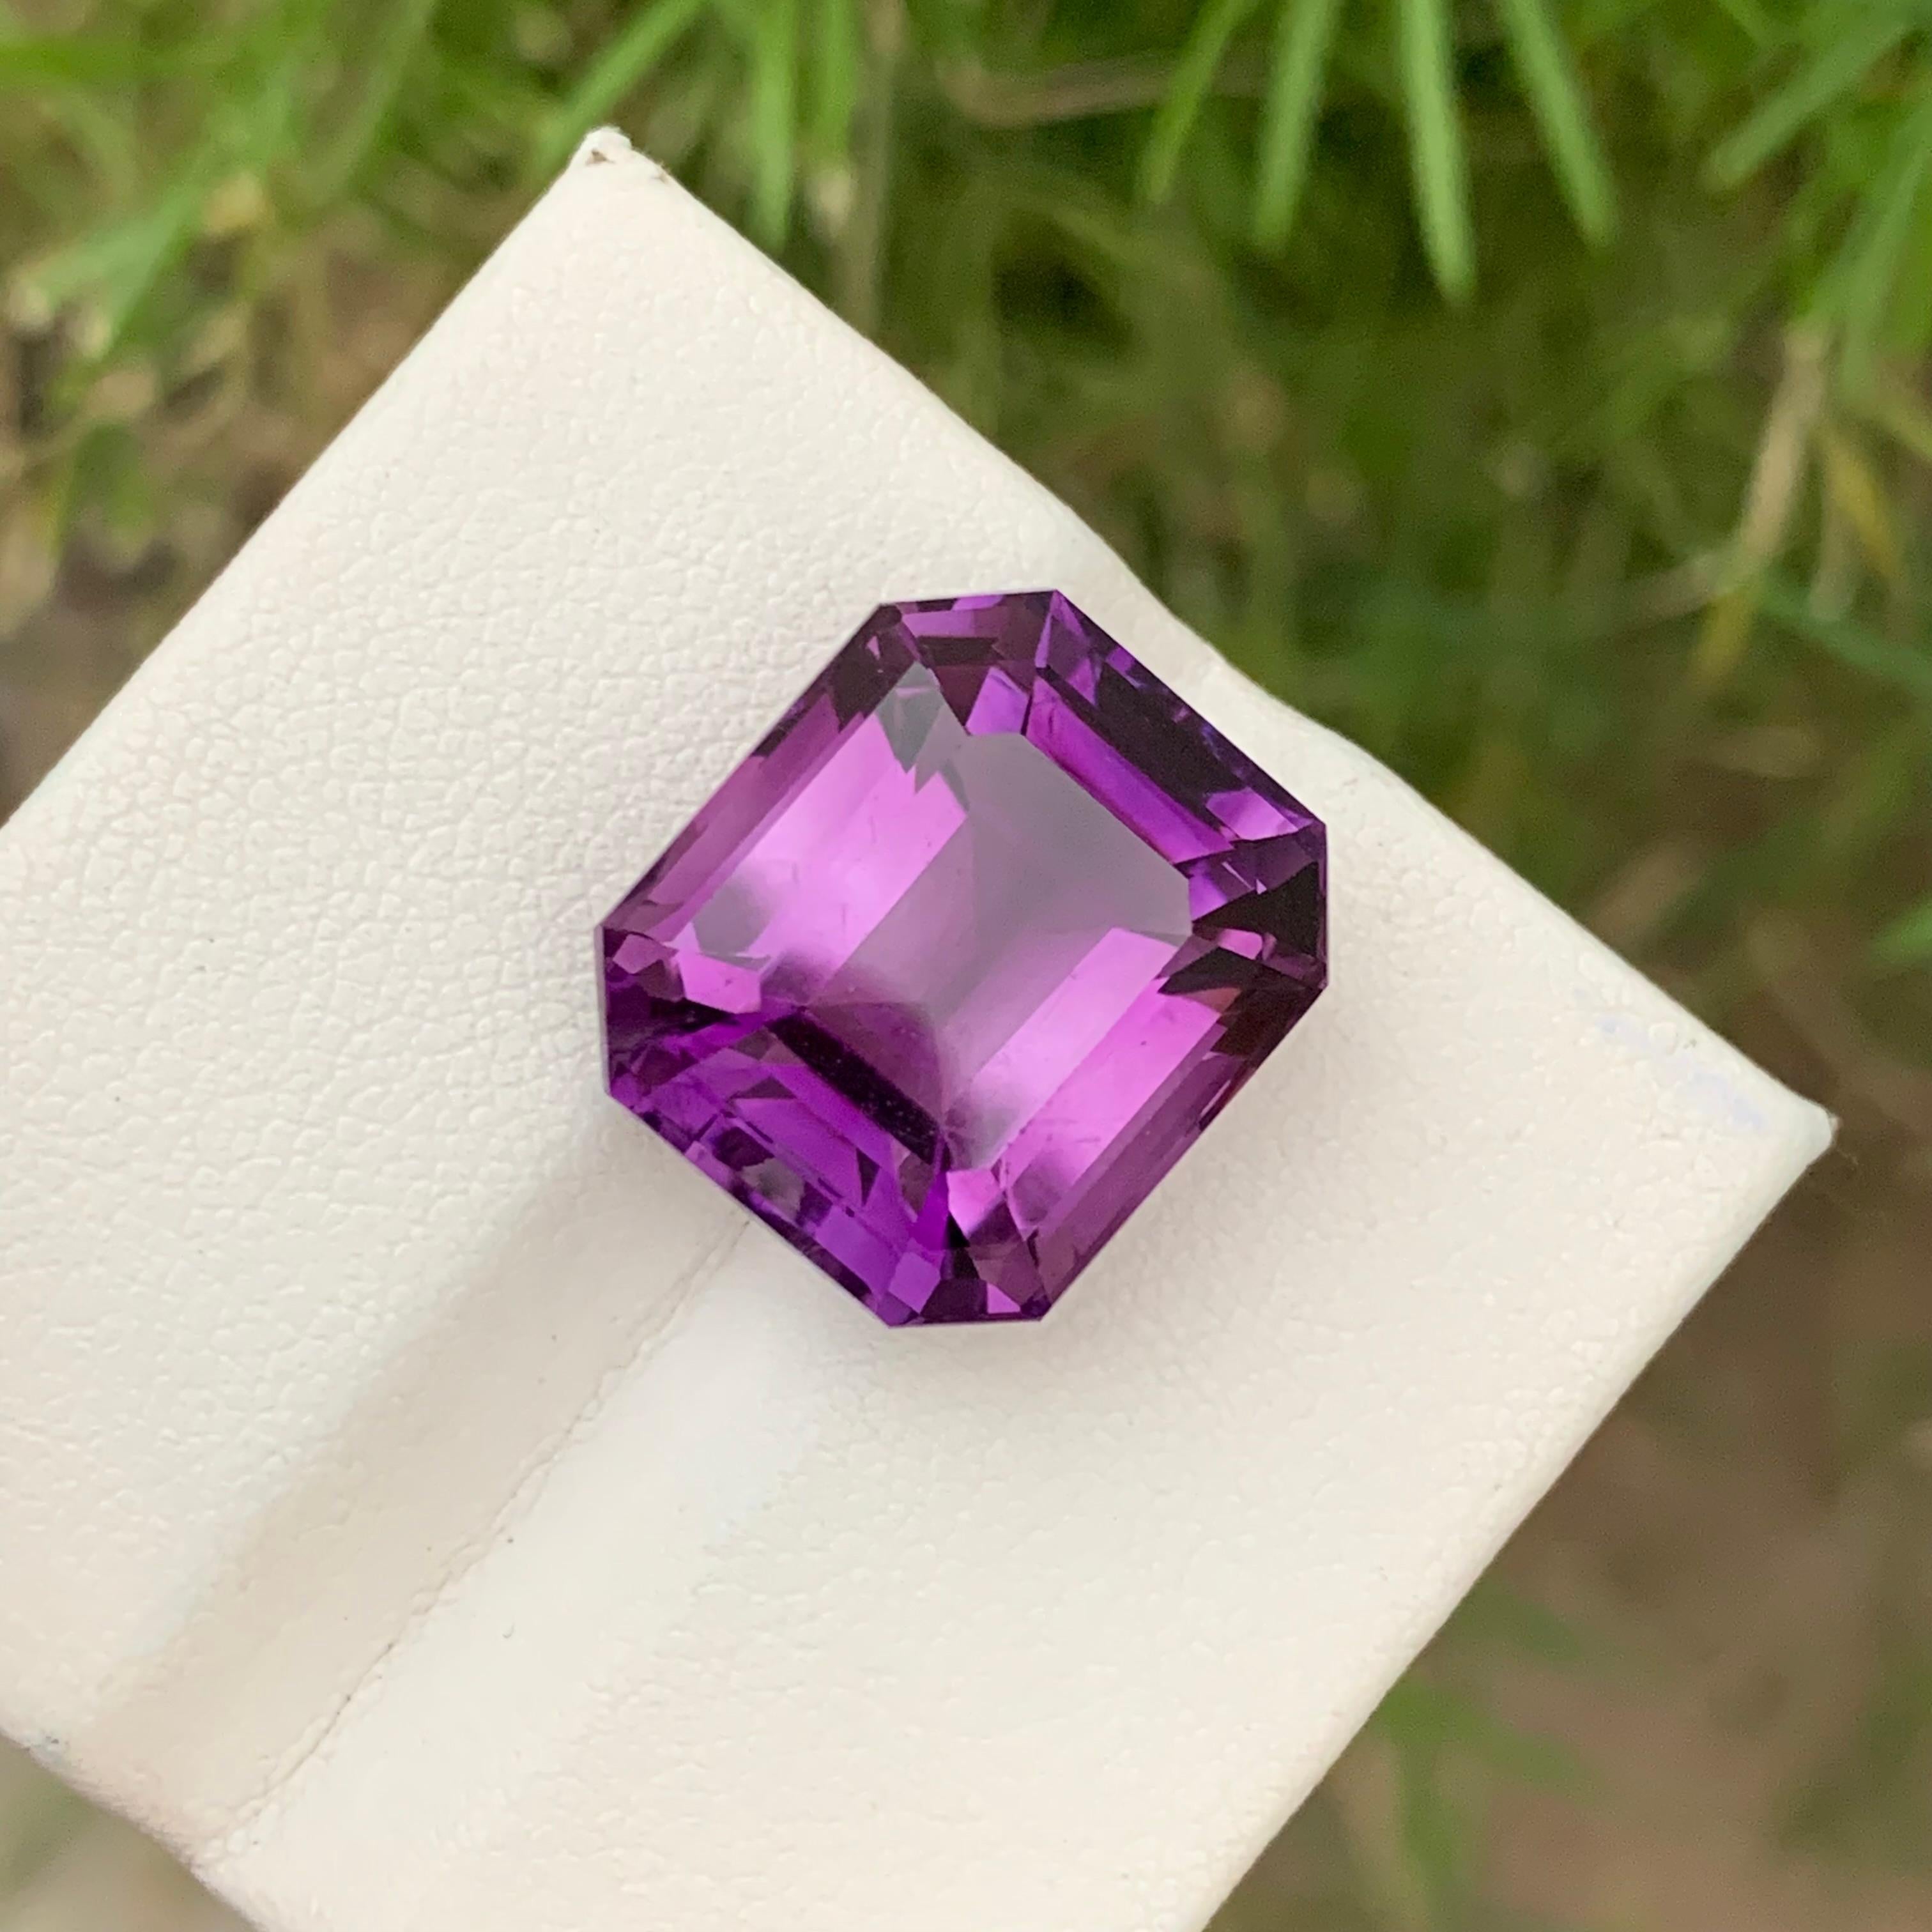 19.0 Carats Natural Loose Deep Purple Amethyst Gemstone From Brazil Mine For Sale 5